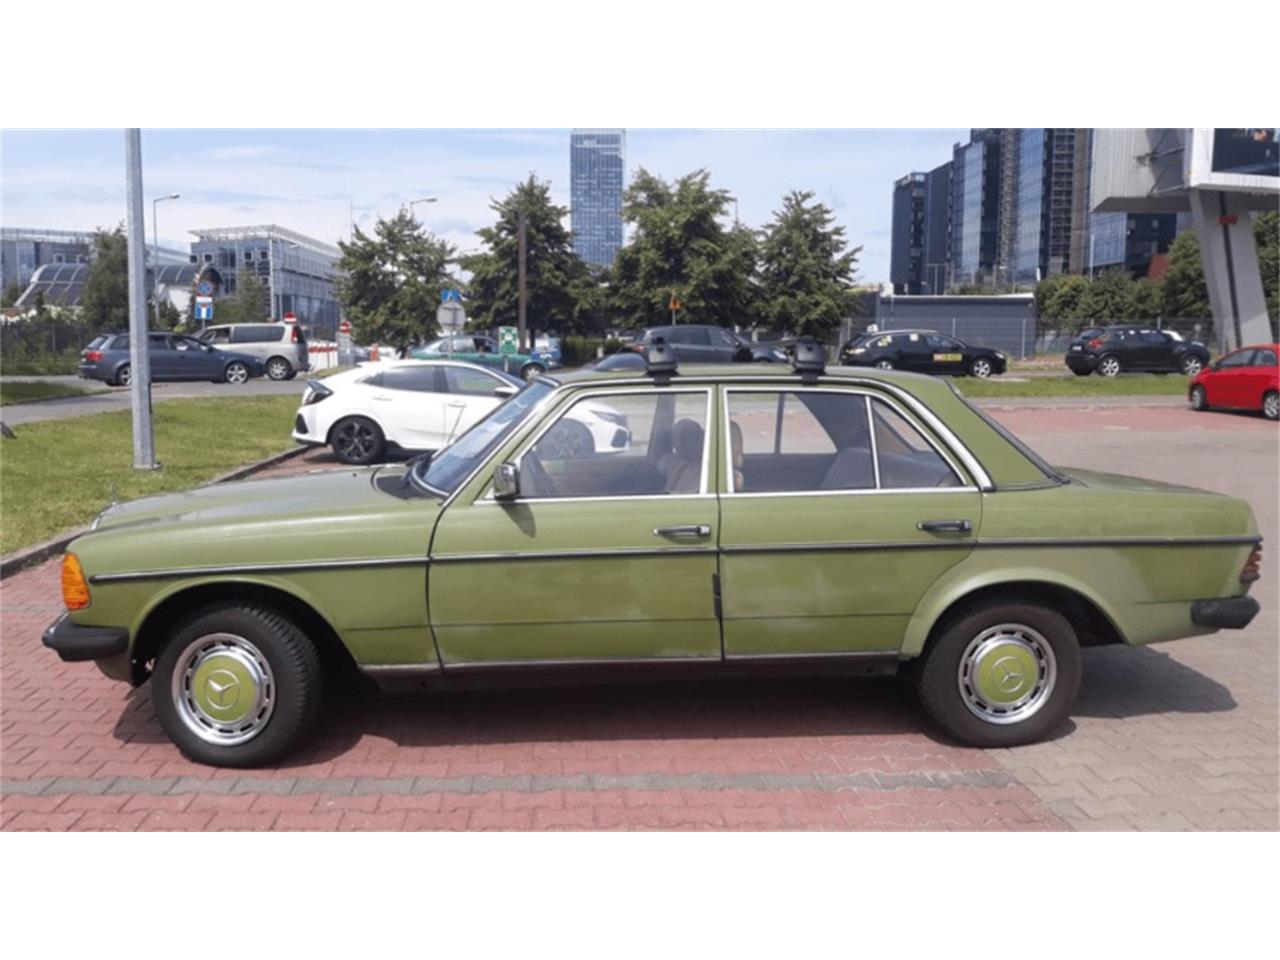 For Sale: 1980 Mercedes-Benz W123 in Hobart, Indiana for sale in Hobart, IN